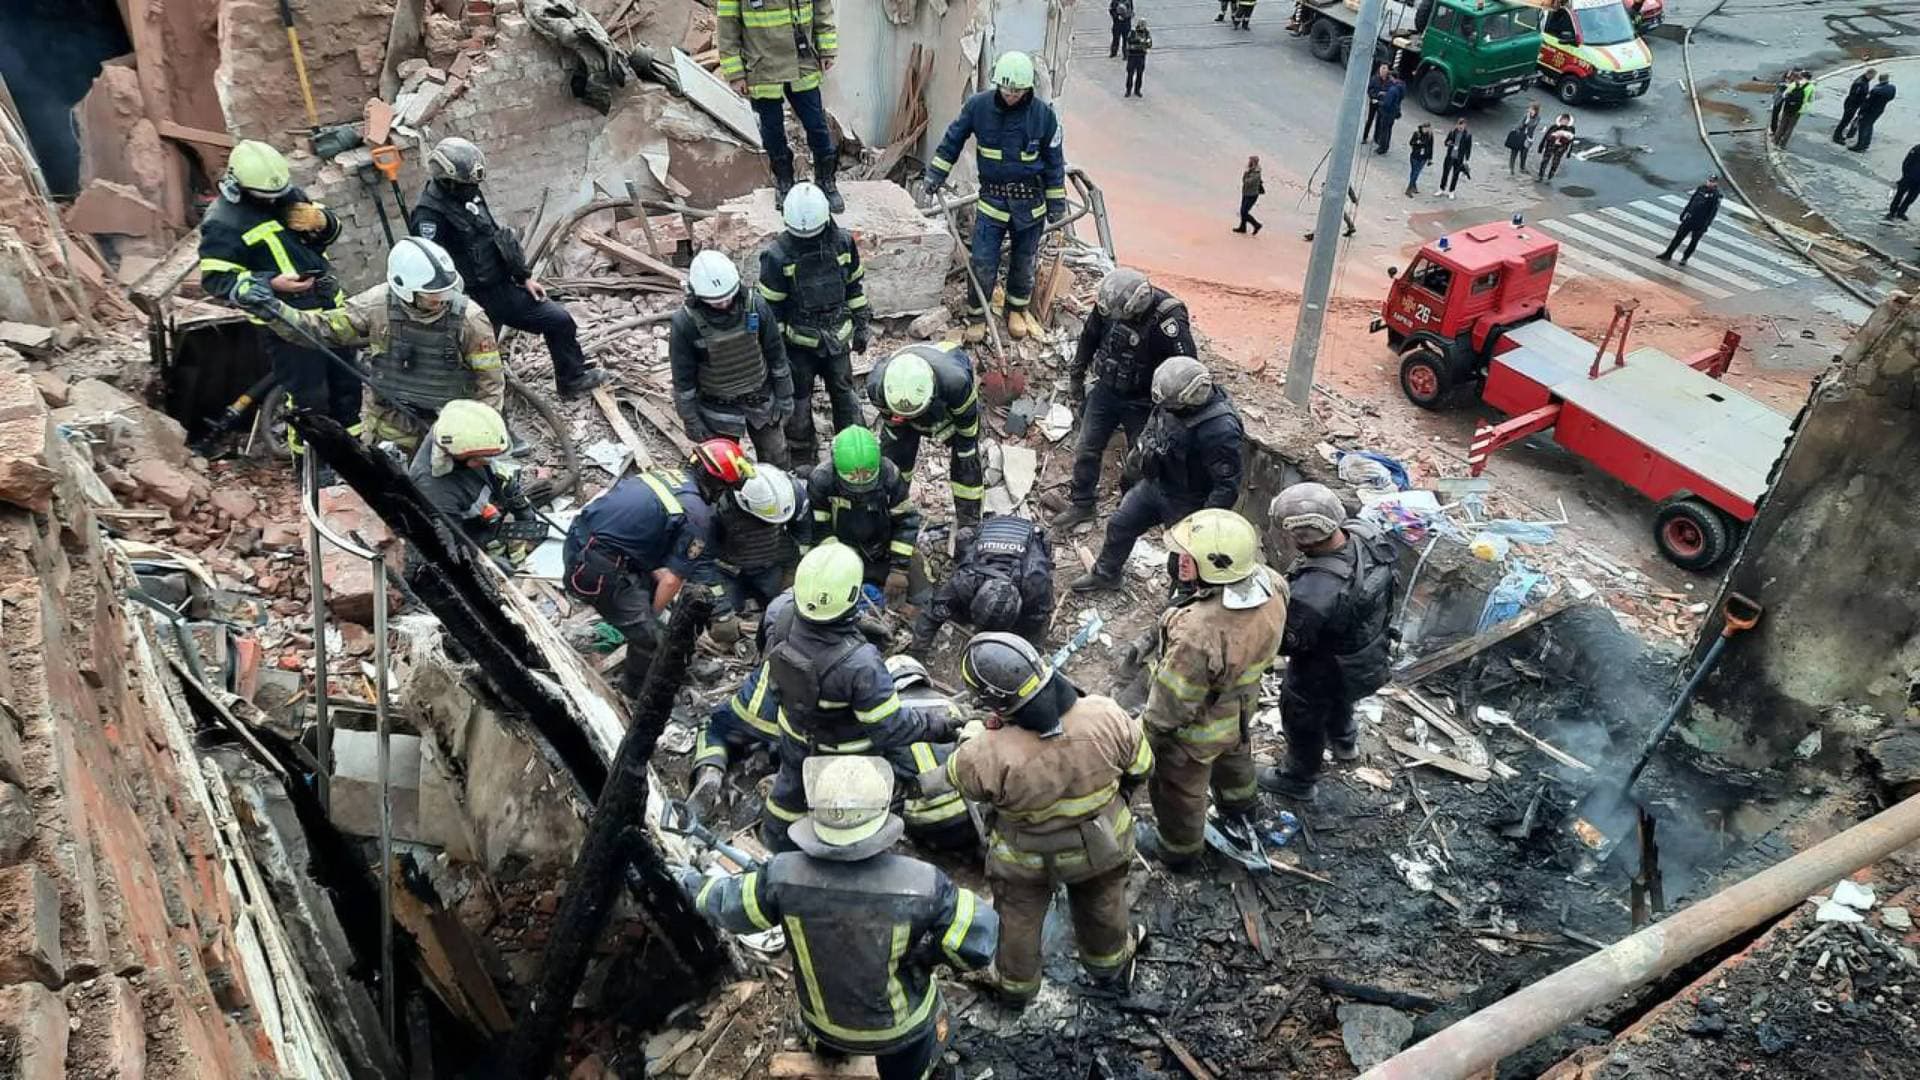 emergency workers search for victims of the Russian rocket attack that damaged a multi-storey building in central Kharkiv